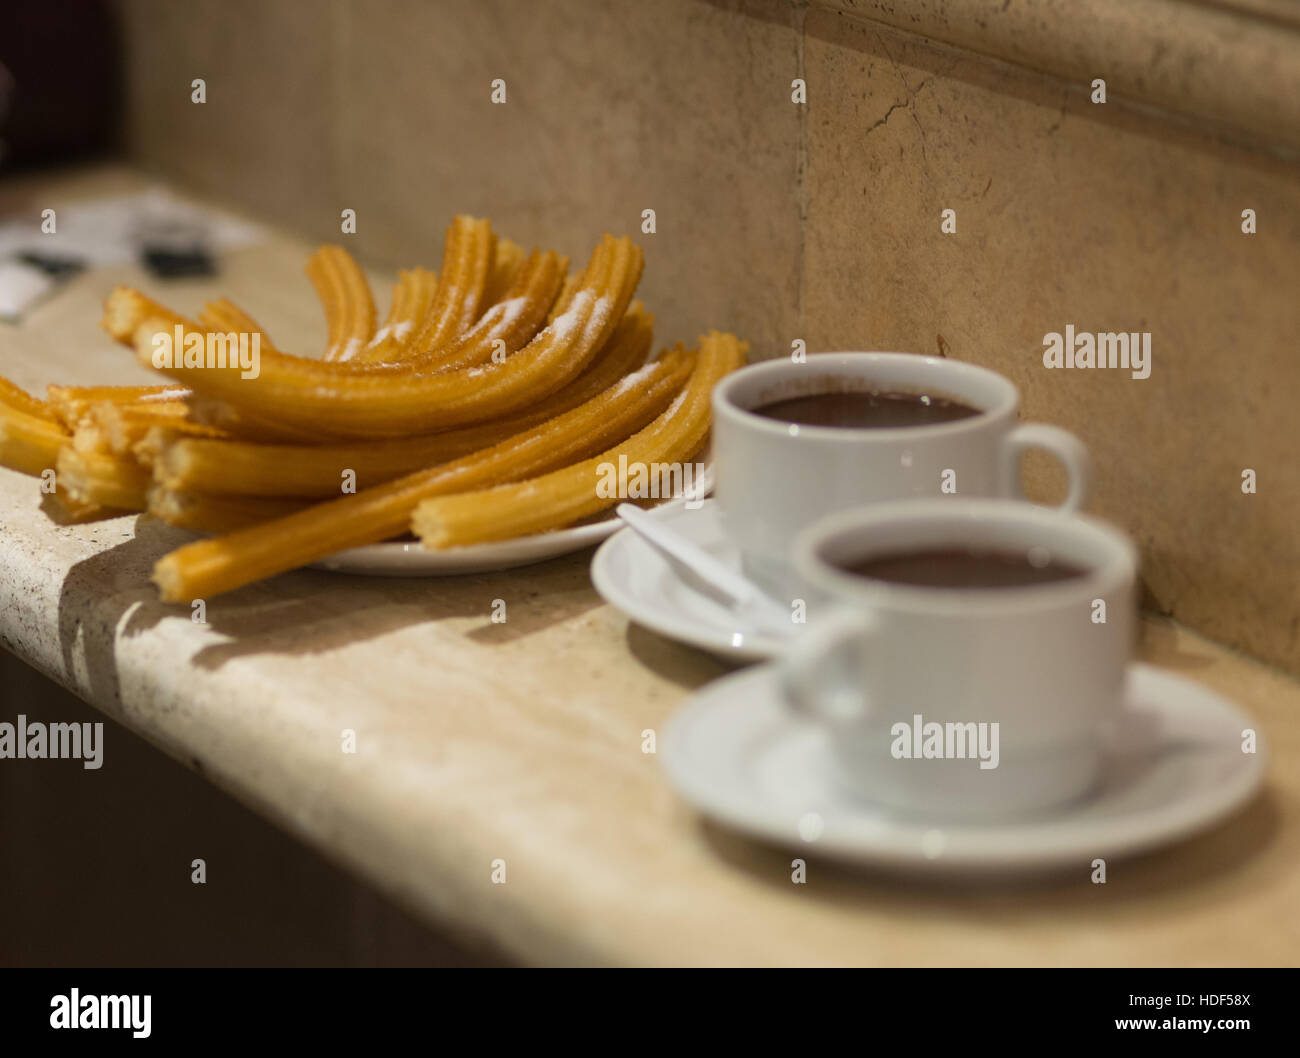 Churros with chocolate, a typical Spanish sweet snack Stock Photo